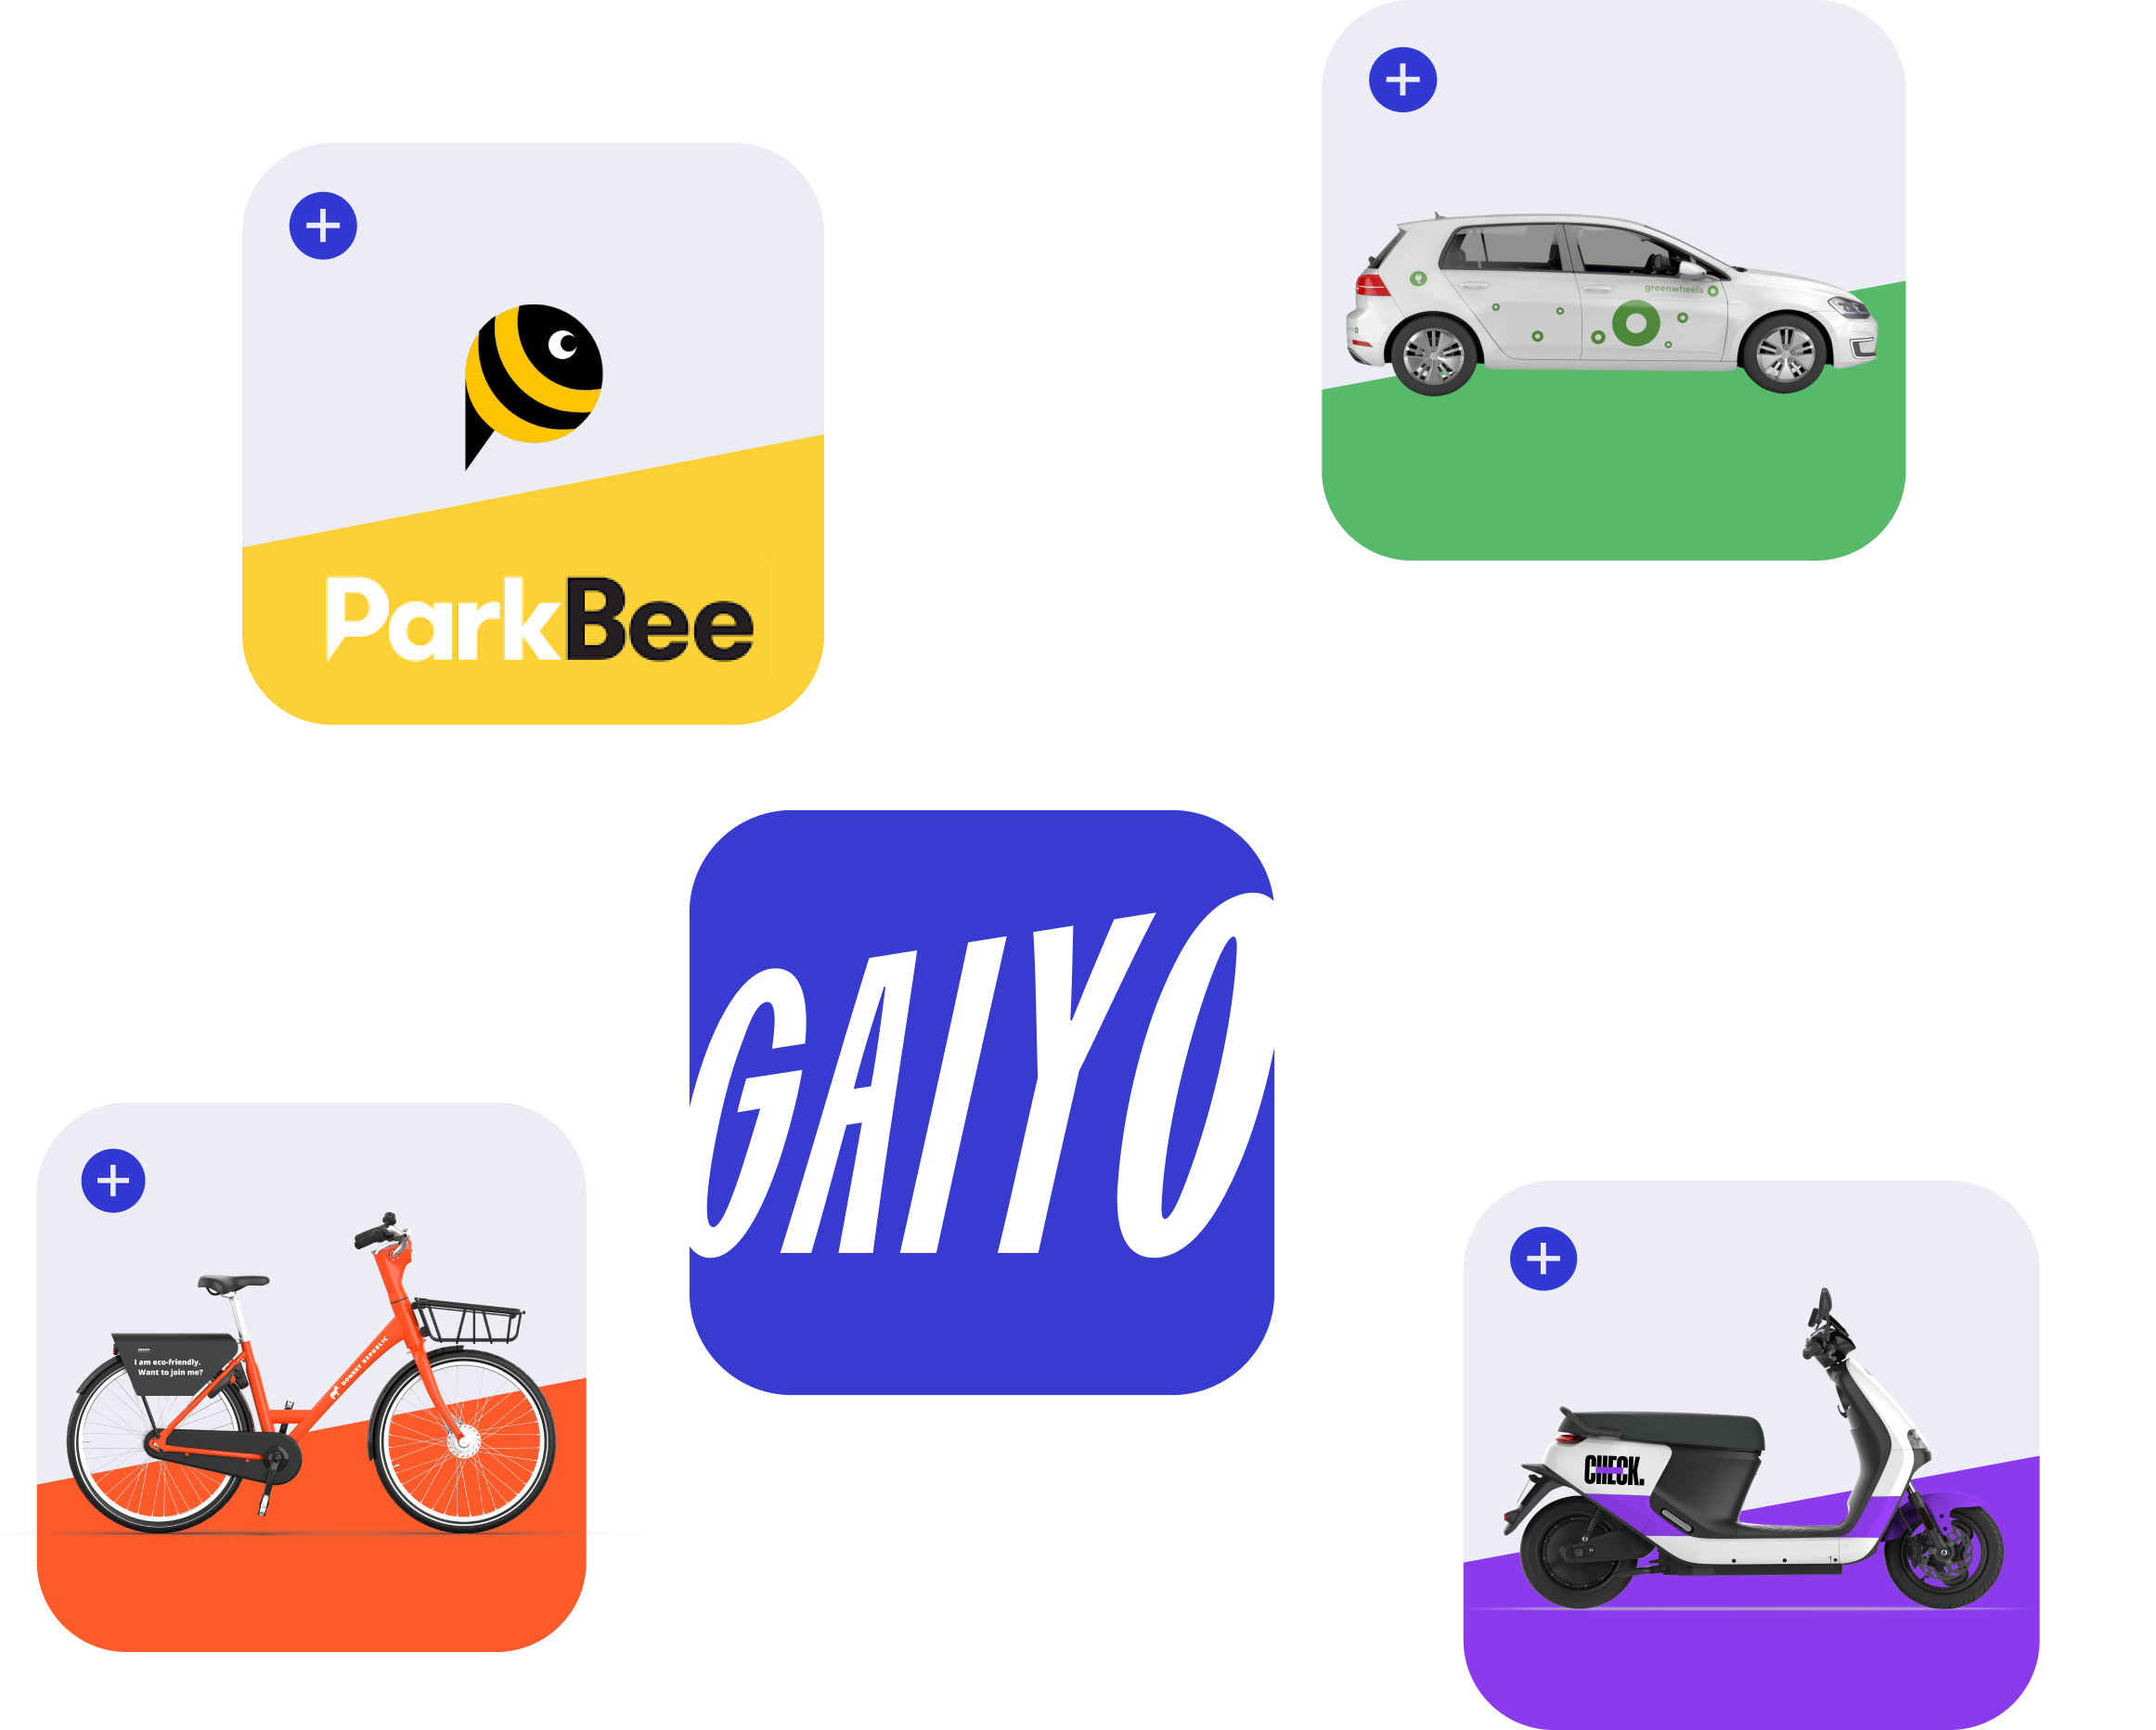 Get going. Get Gaiyo. One key for all mobility.